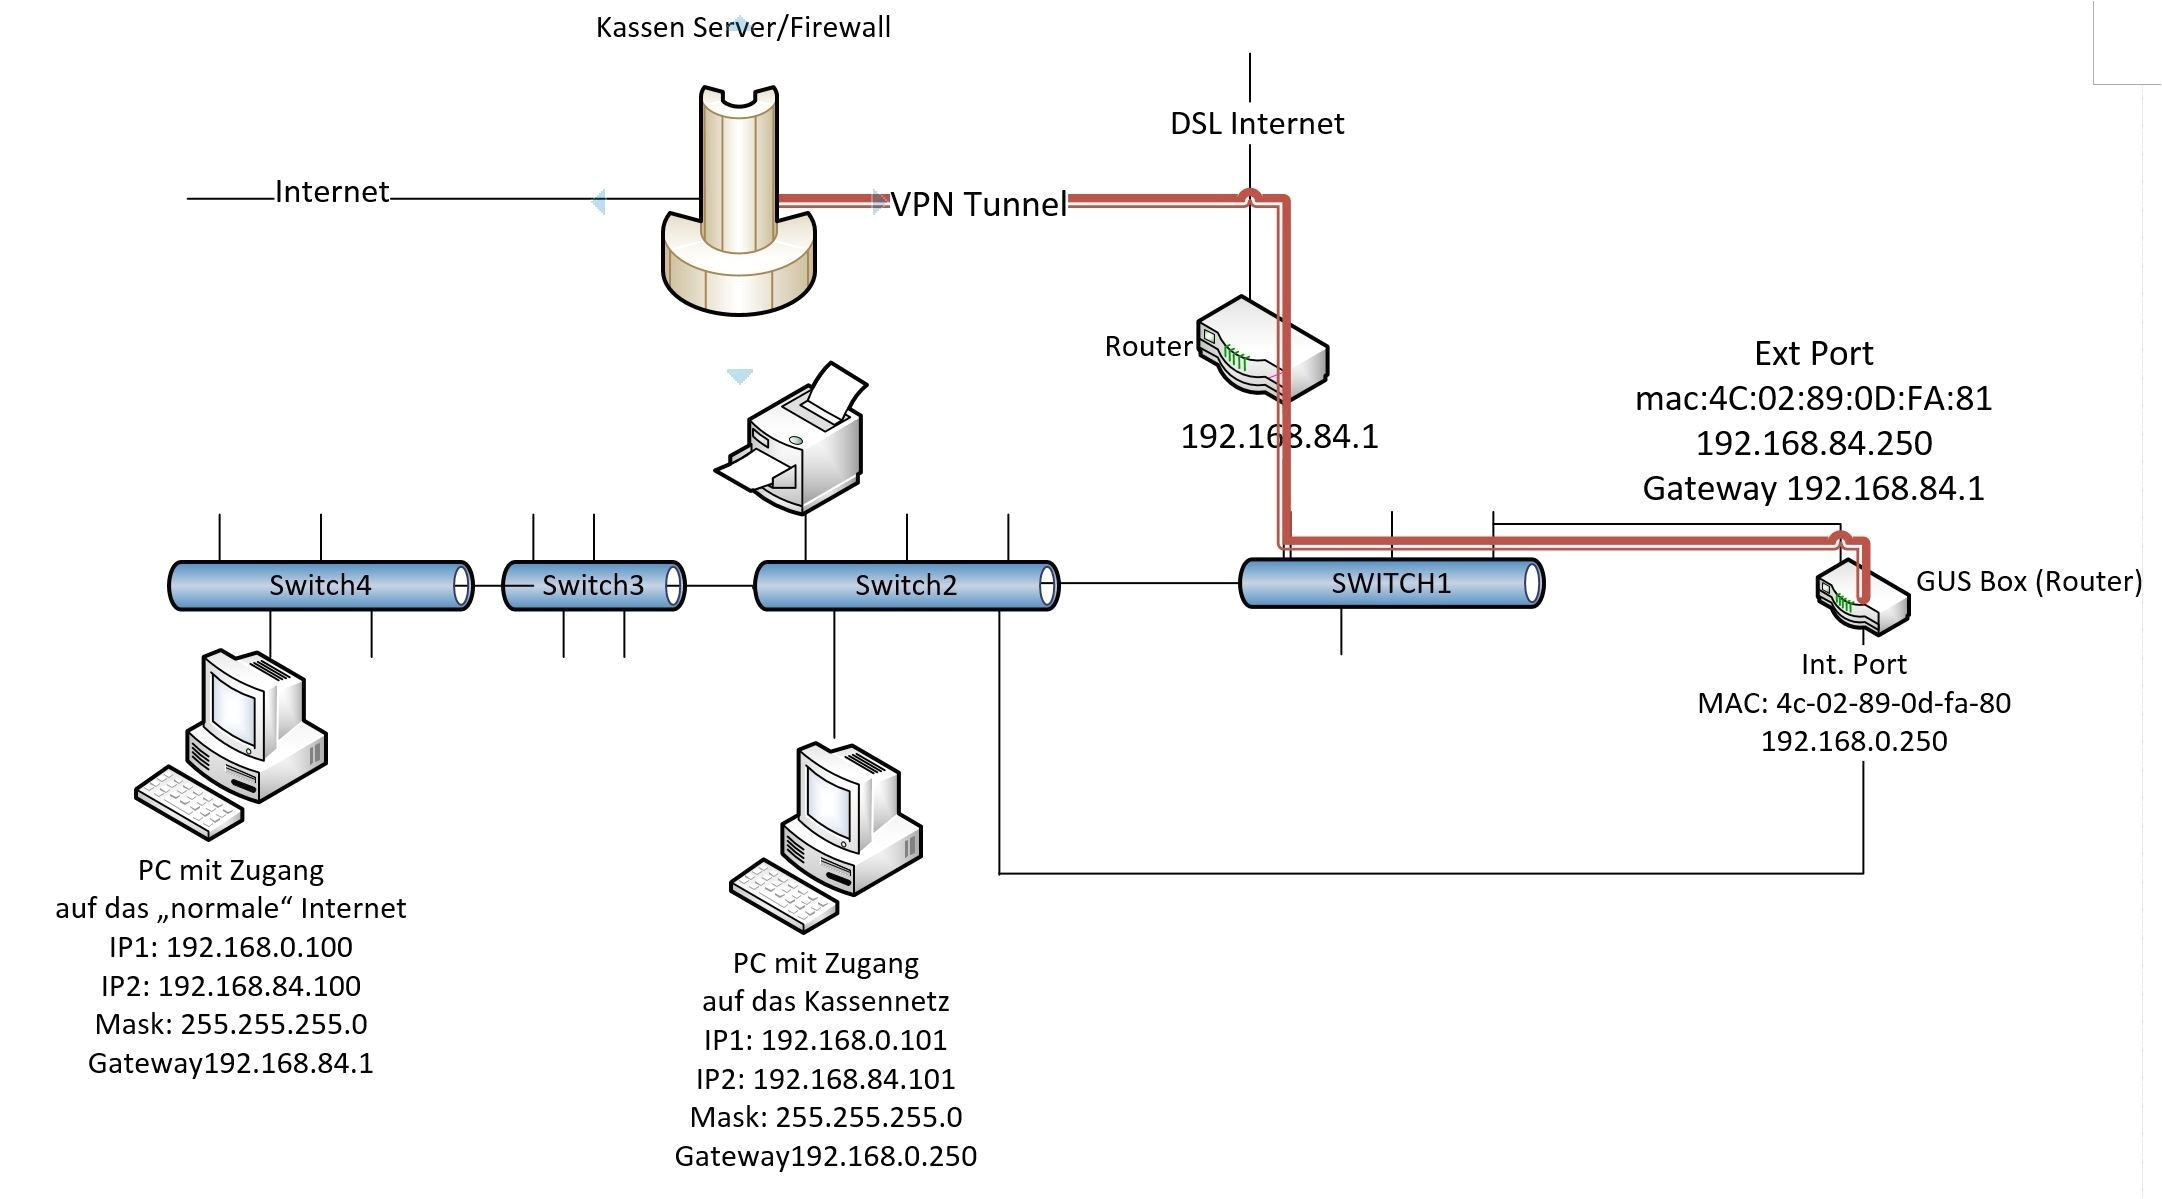 vdsl wiring diagram wiring diagramwiring diagram for dsl inter wiring diagram centreat t dsl work wiring